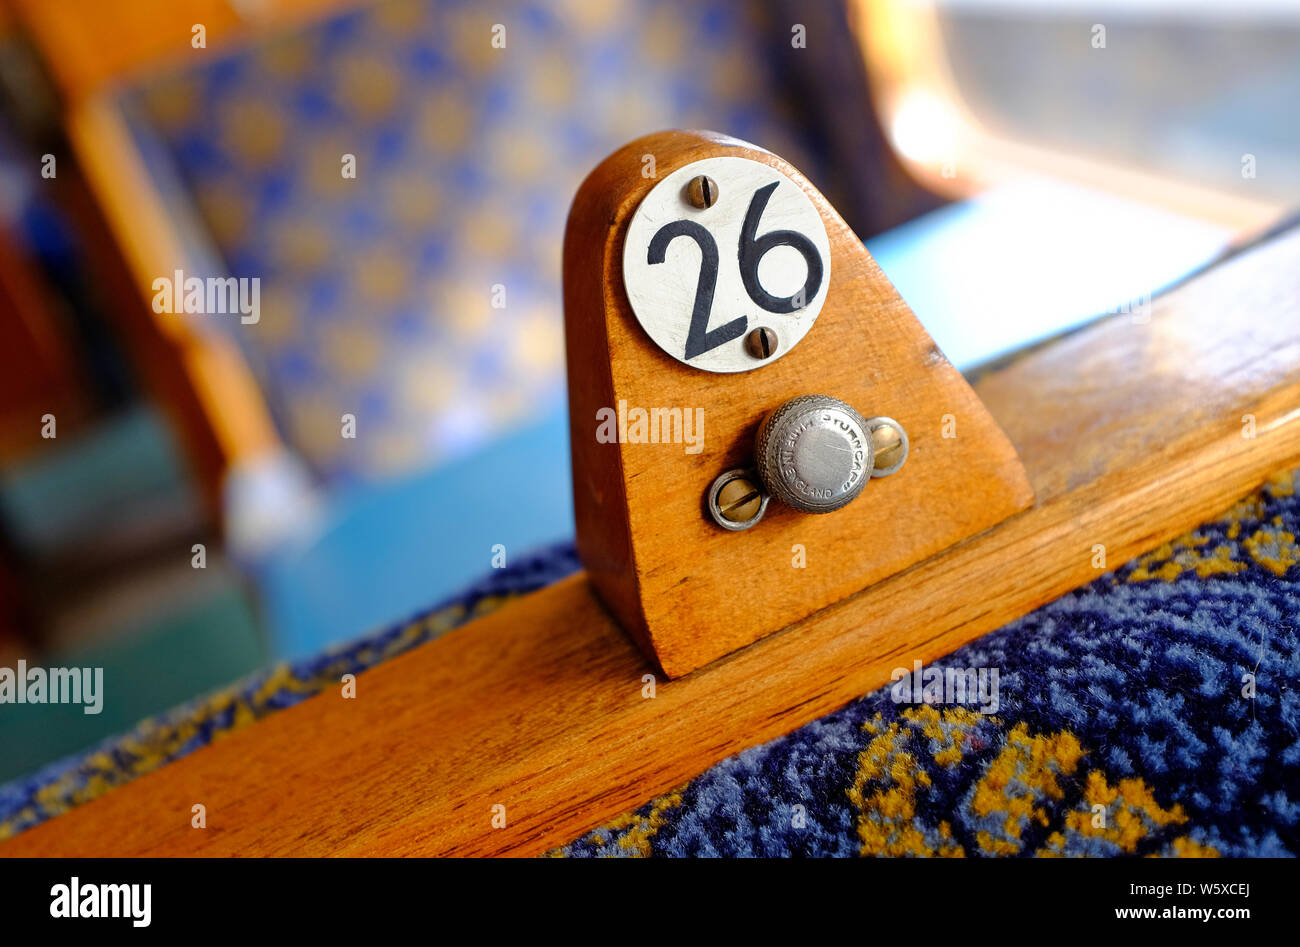 number 26 numeral on old railway carriage seat, sheringham, north norfolk, england Stock Photo